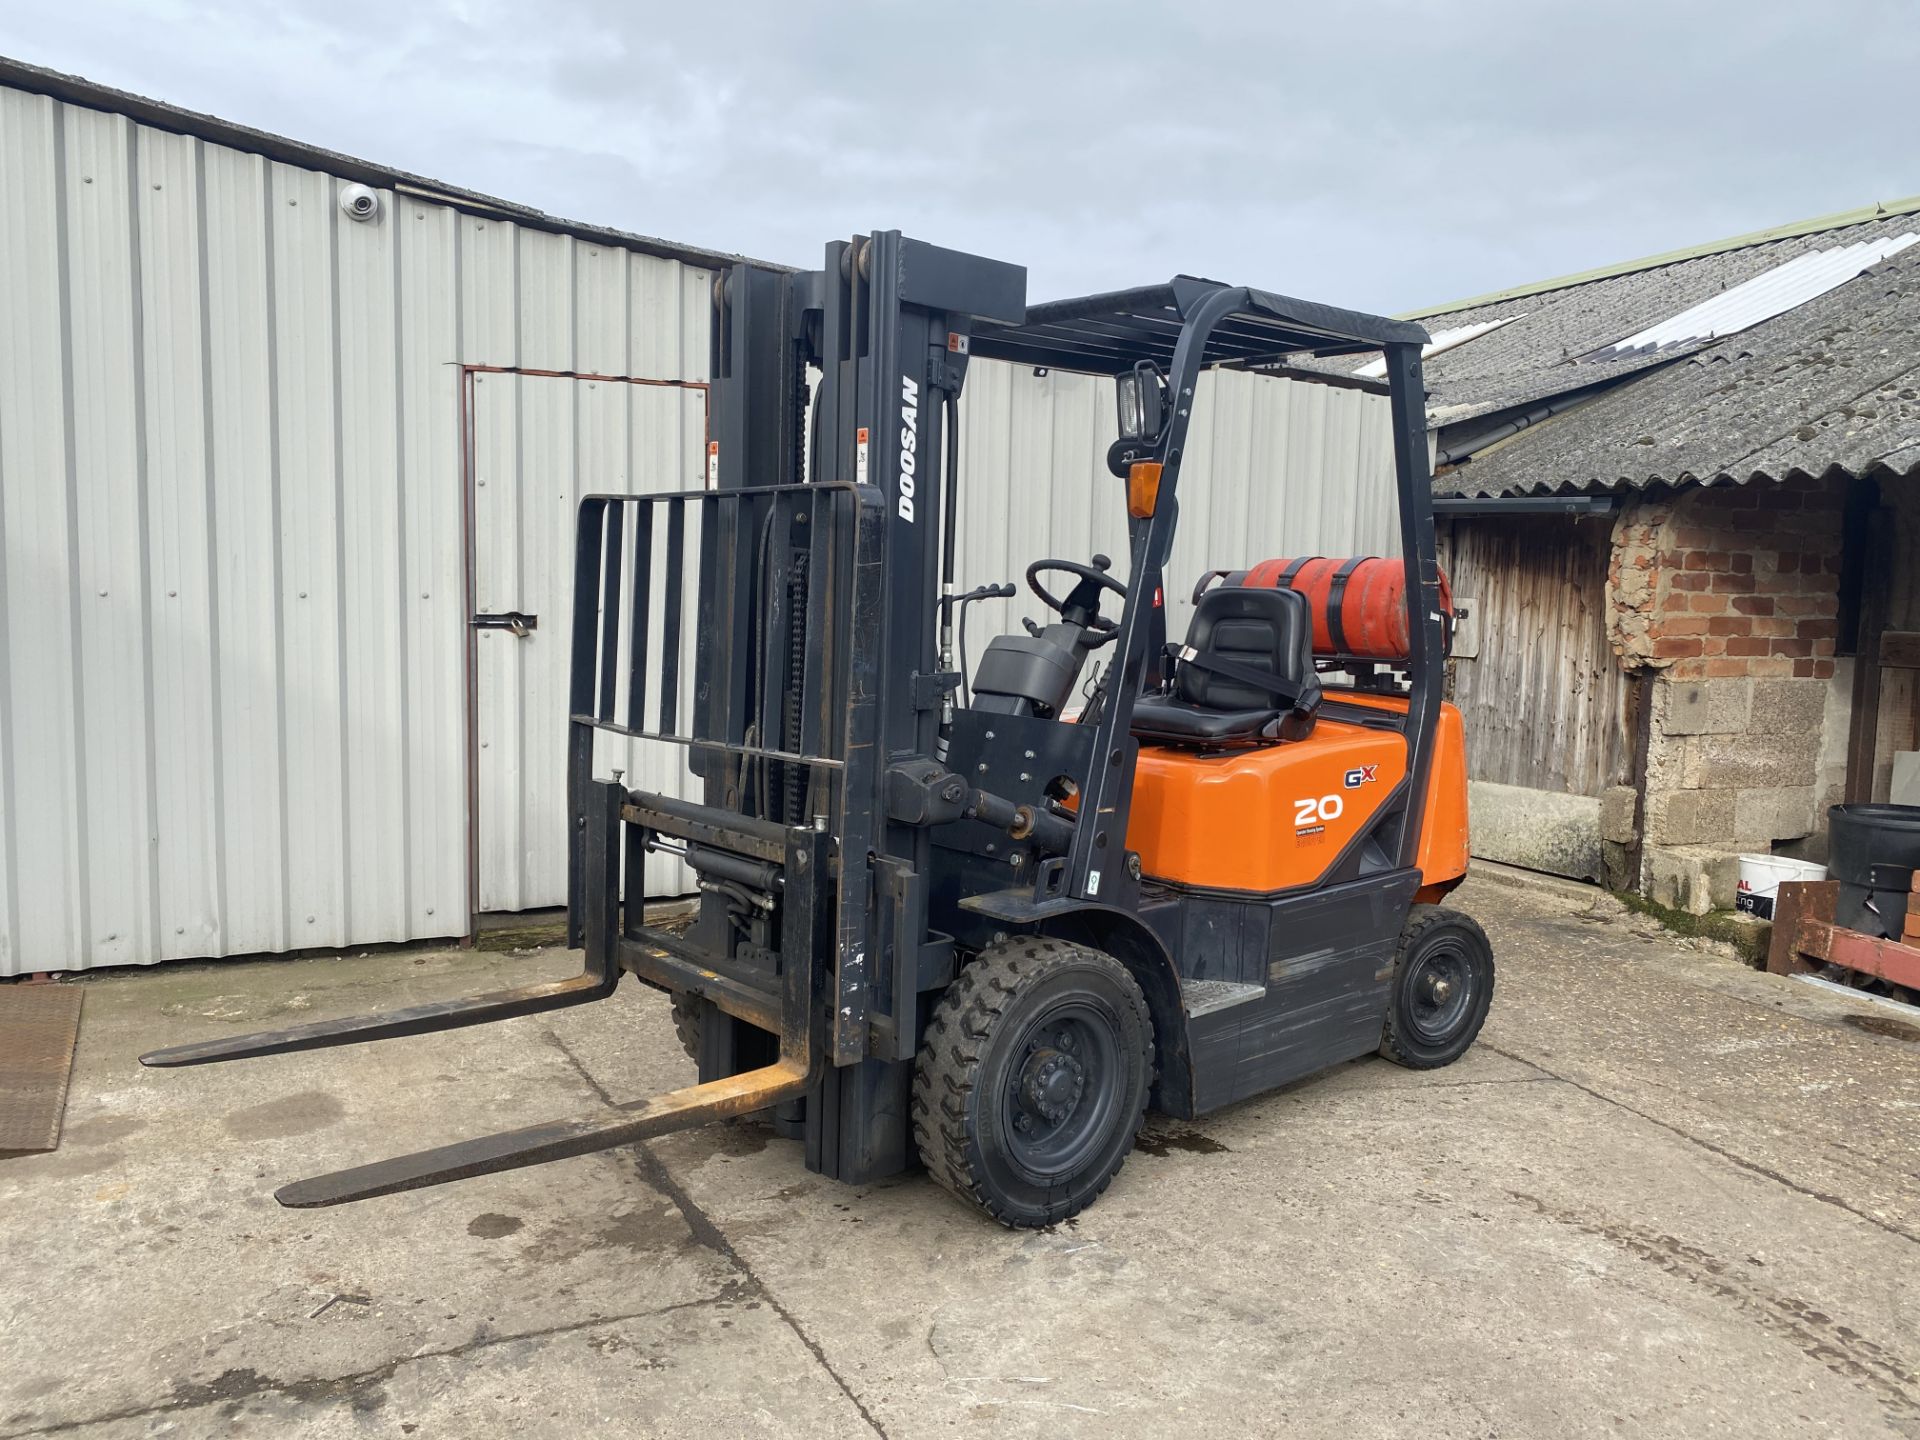 DOOSAN 2 TON GAS FORKLIFT, YEAR 2016, TRIPLE MAST, FREE LIFT, CONTAINER SPEC, SIDE SHIFT, 477 HOURS! - Image 4 of 9